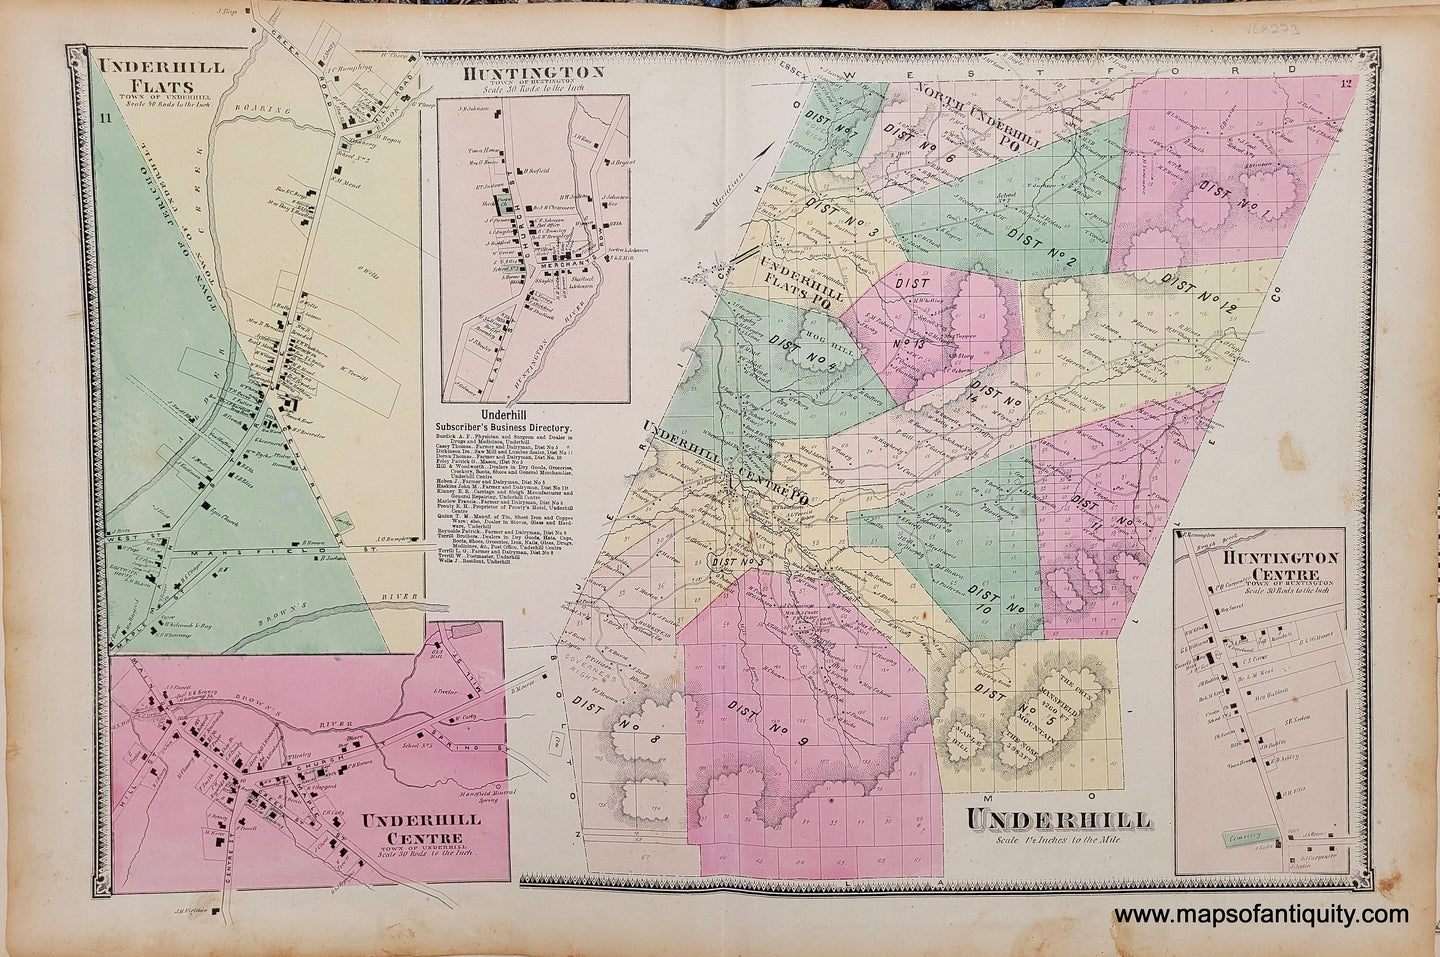 Genuine-Antique-Hand-colored-Map-Underhill-VT-with-parts-of-Huntington-1869-Beers-Ellis-Soule-Maps-Of-Antiquity